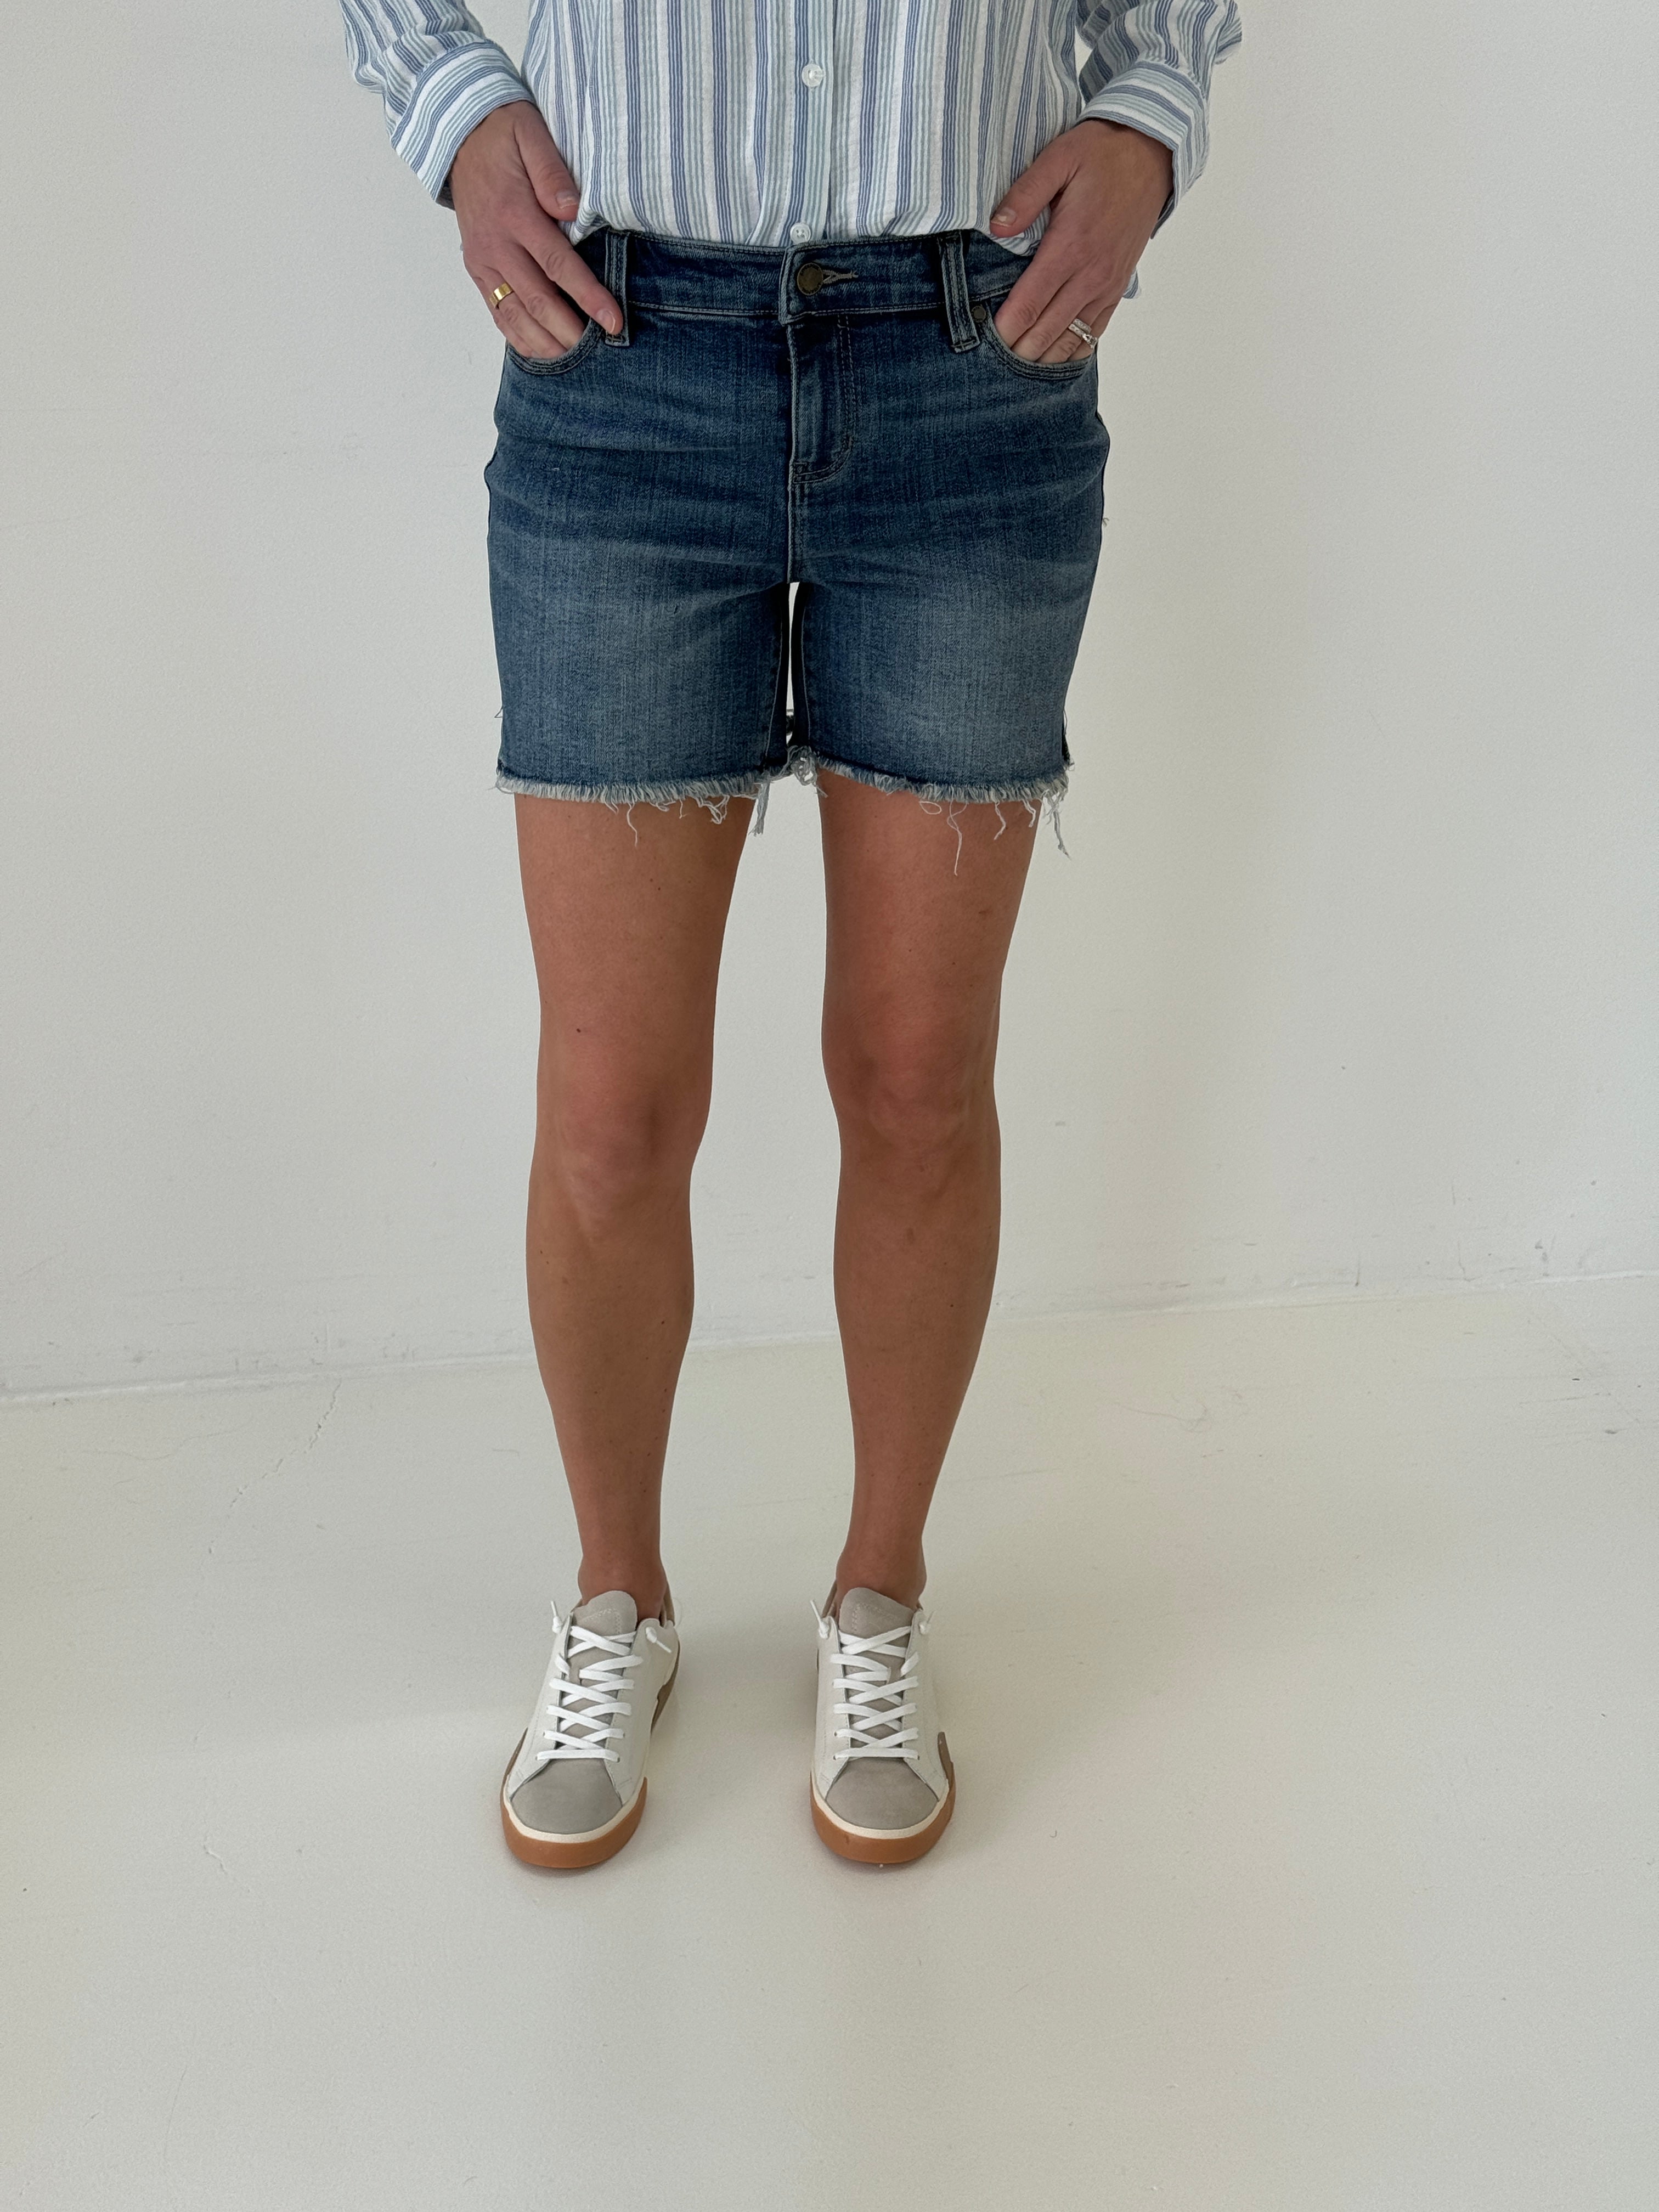 Liverpool Vickie Fray Hem Short in Harpswell Wash-232 Shorts-Little Bird Boutique